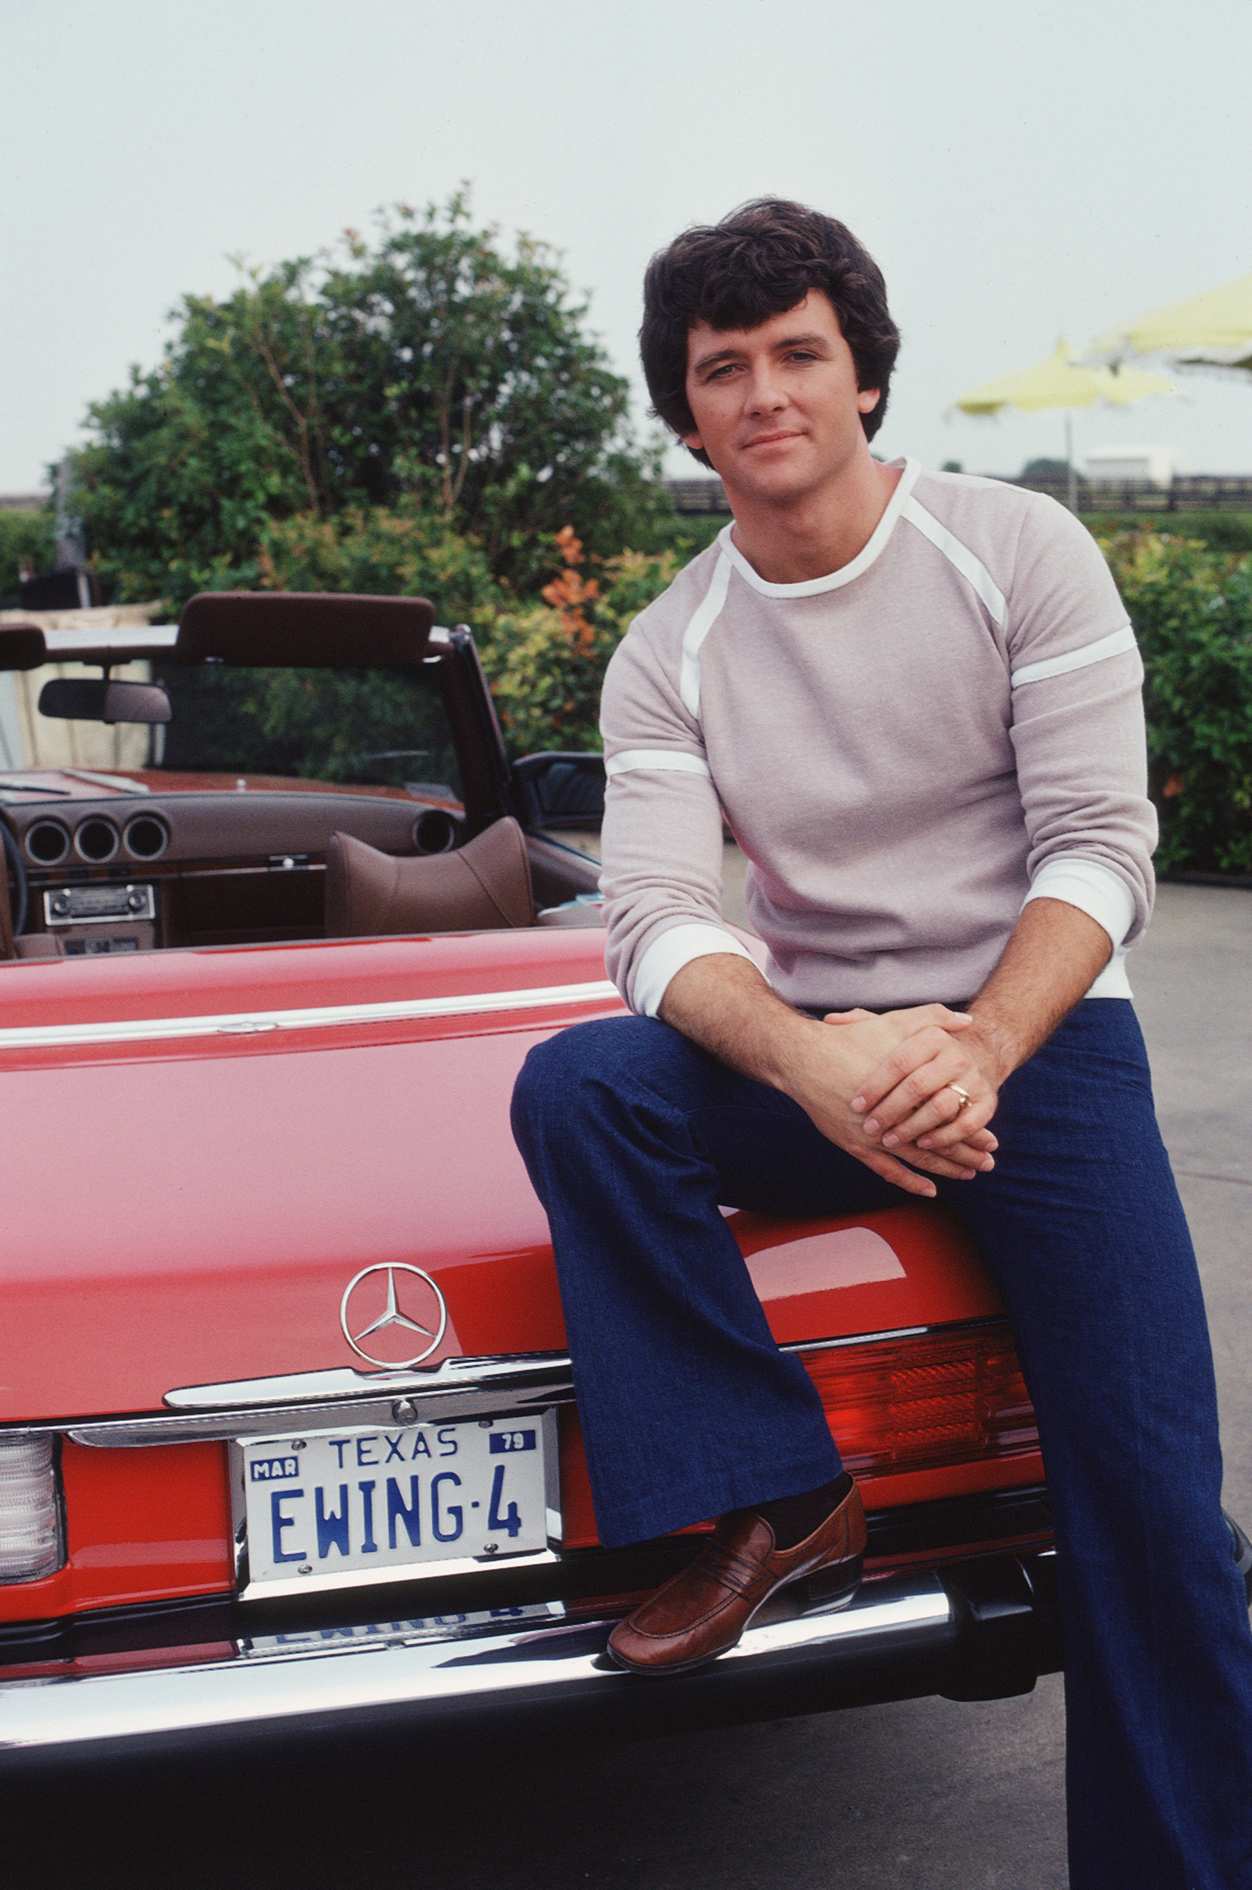 Patrick Duffy, who plays Bobby Ewing, in a promotional still from "Dallas" in September 1978 | Source: Getty Images